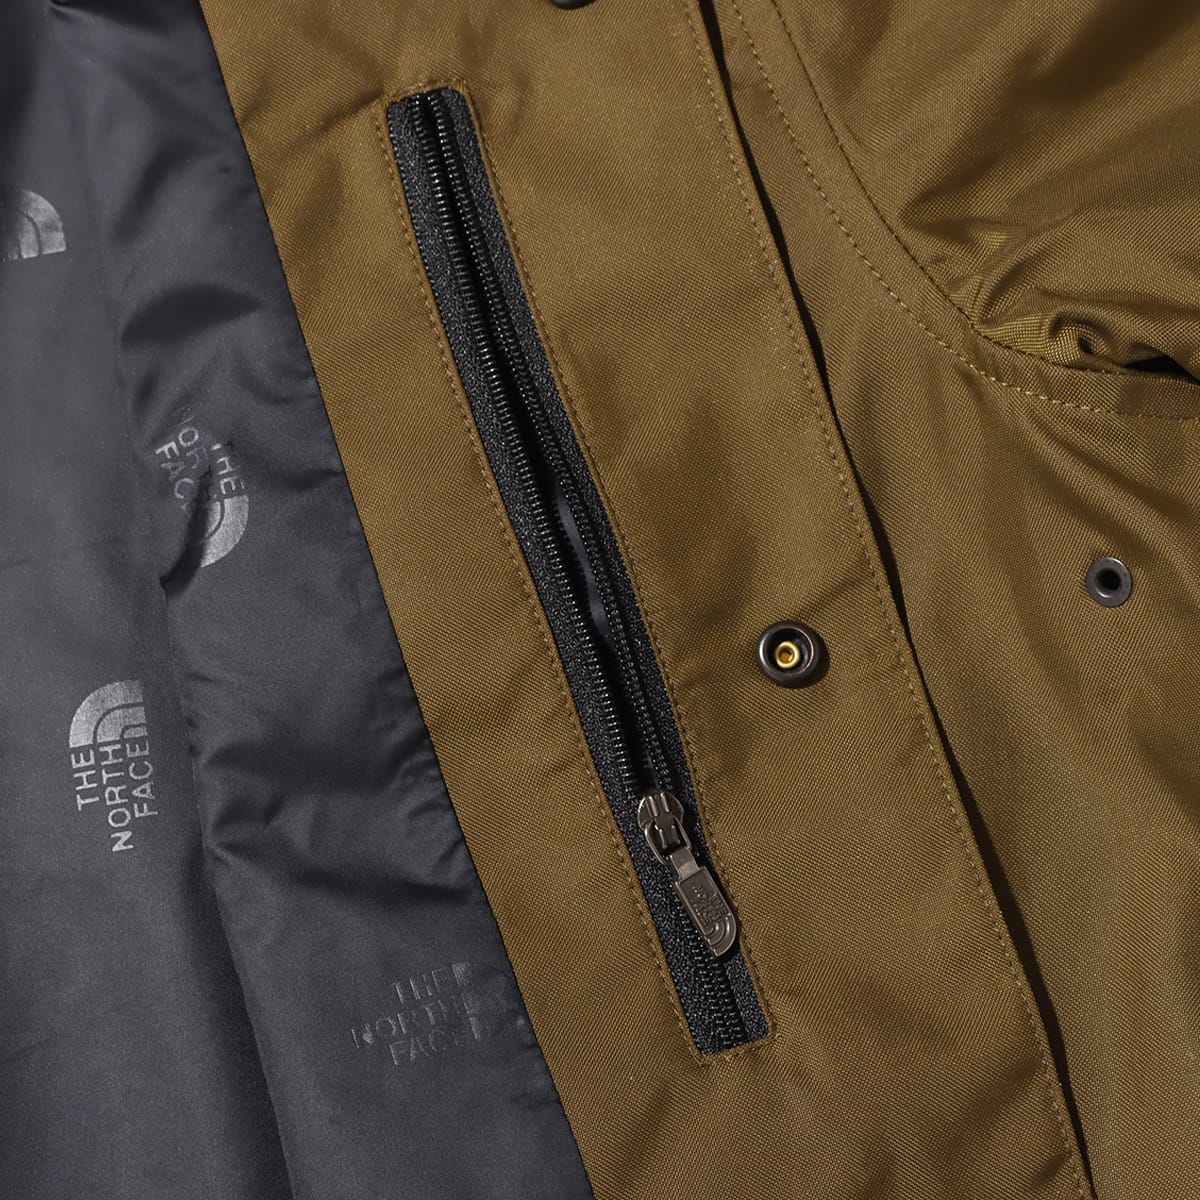 THE NORTH FACE THE COACH JACKET ミリタリーオリーブ 21FW-I